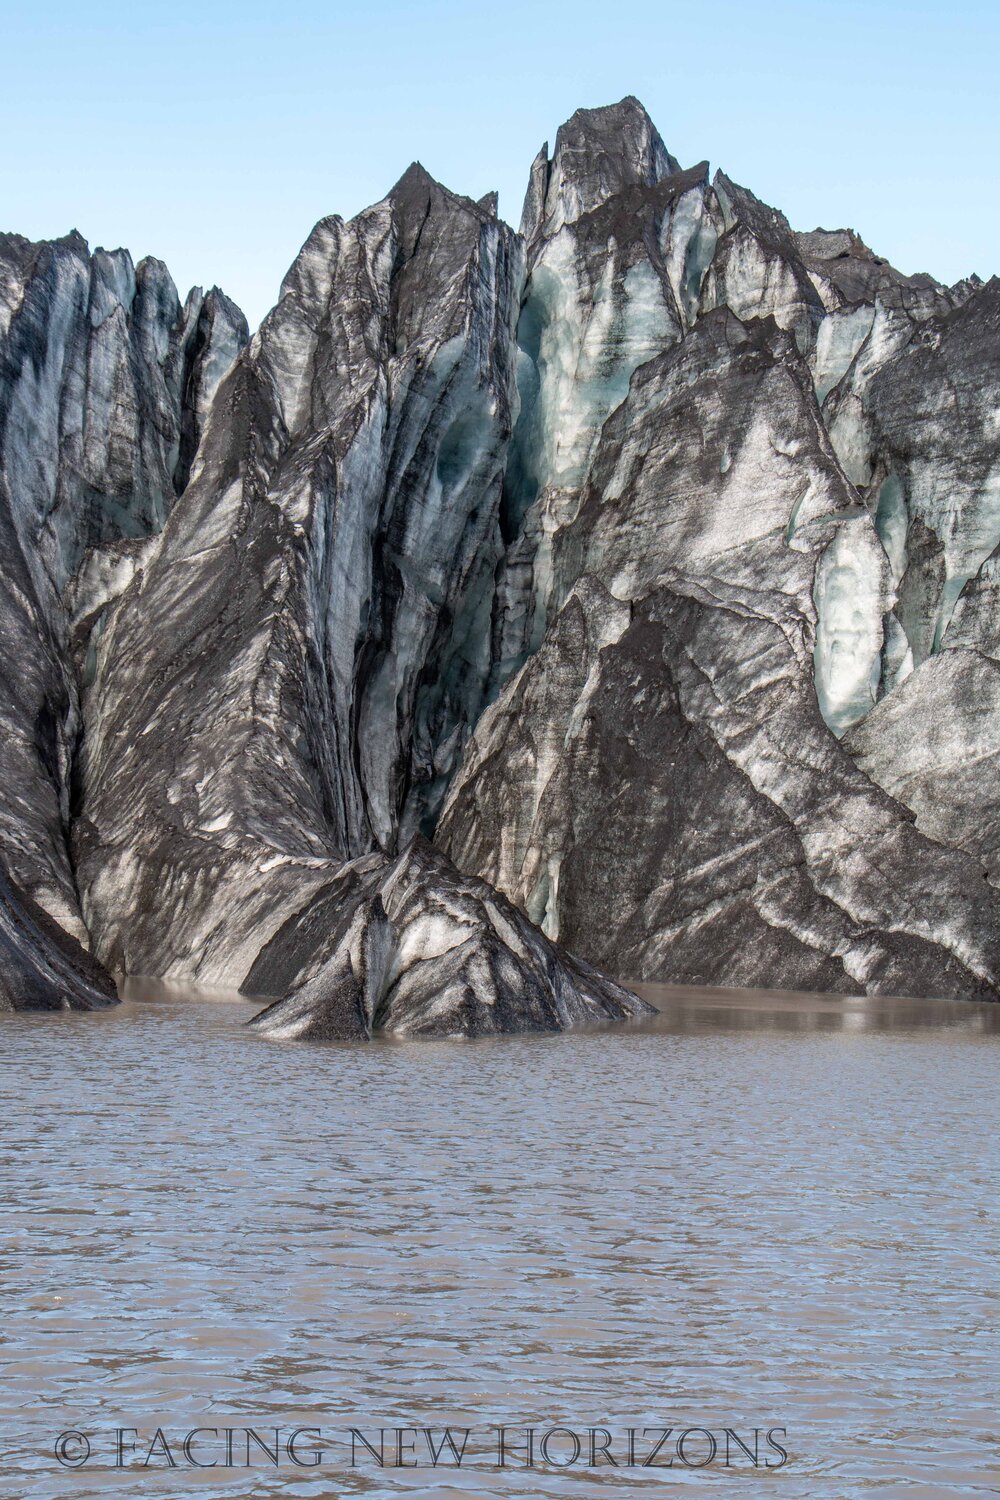  Sharp ice features tower over the water like mountains of their own 